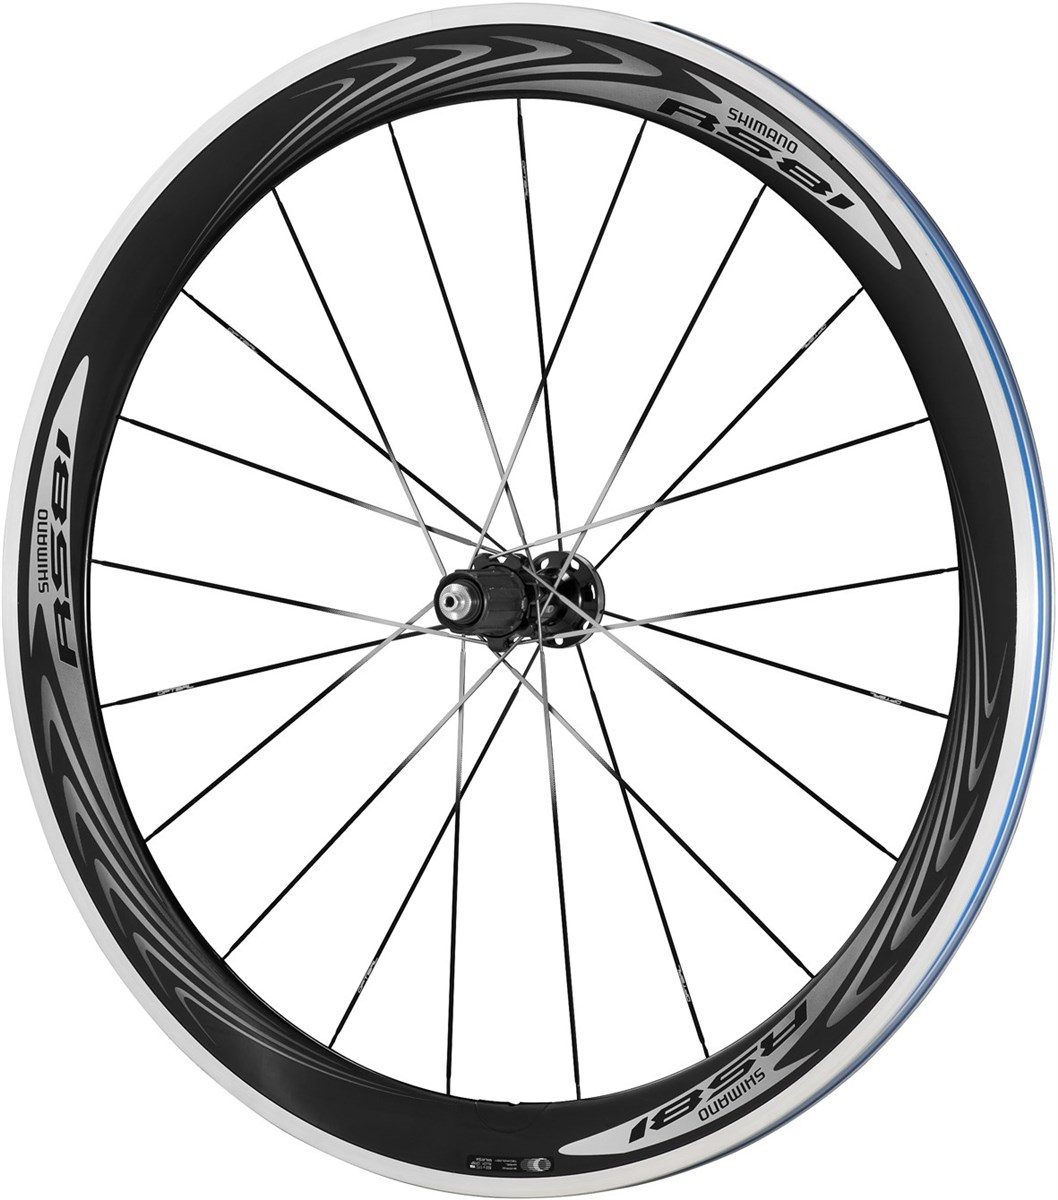 Shimano WH-RS81-C50-CL Wheel - Carbon Clincher 50 mm - 11-Speed - Rear product image